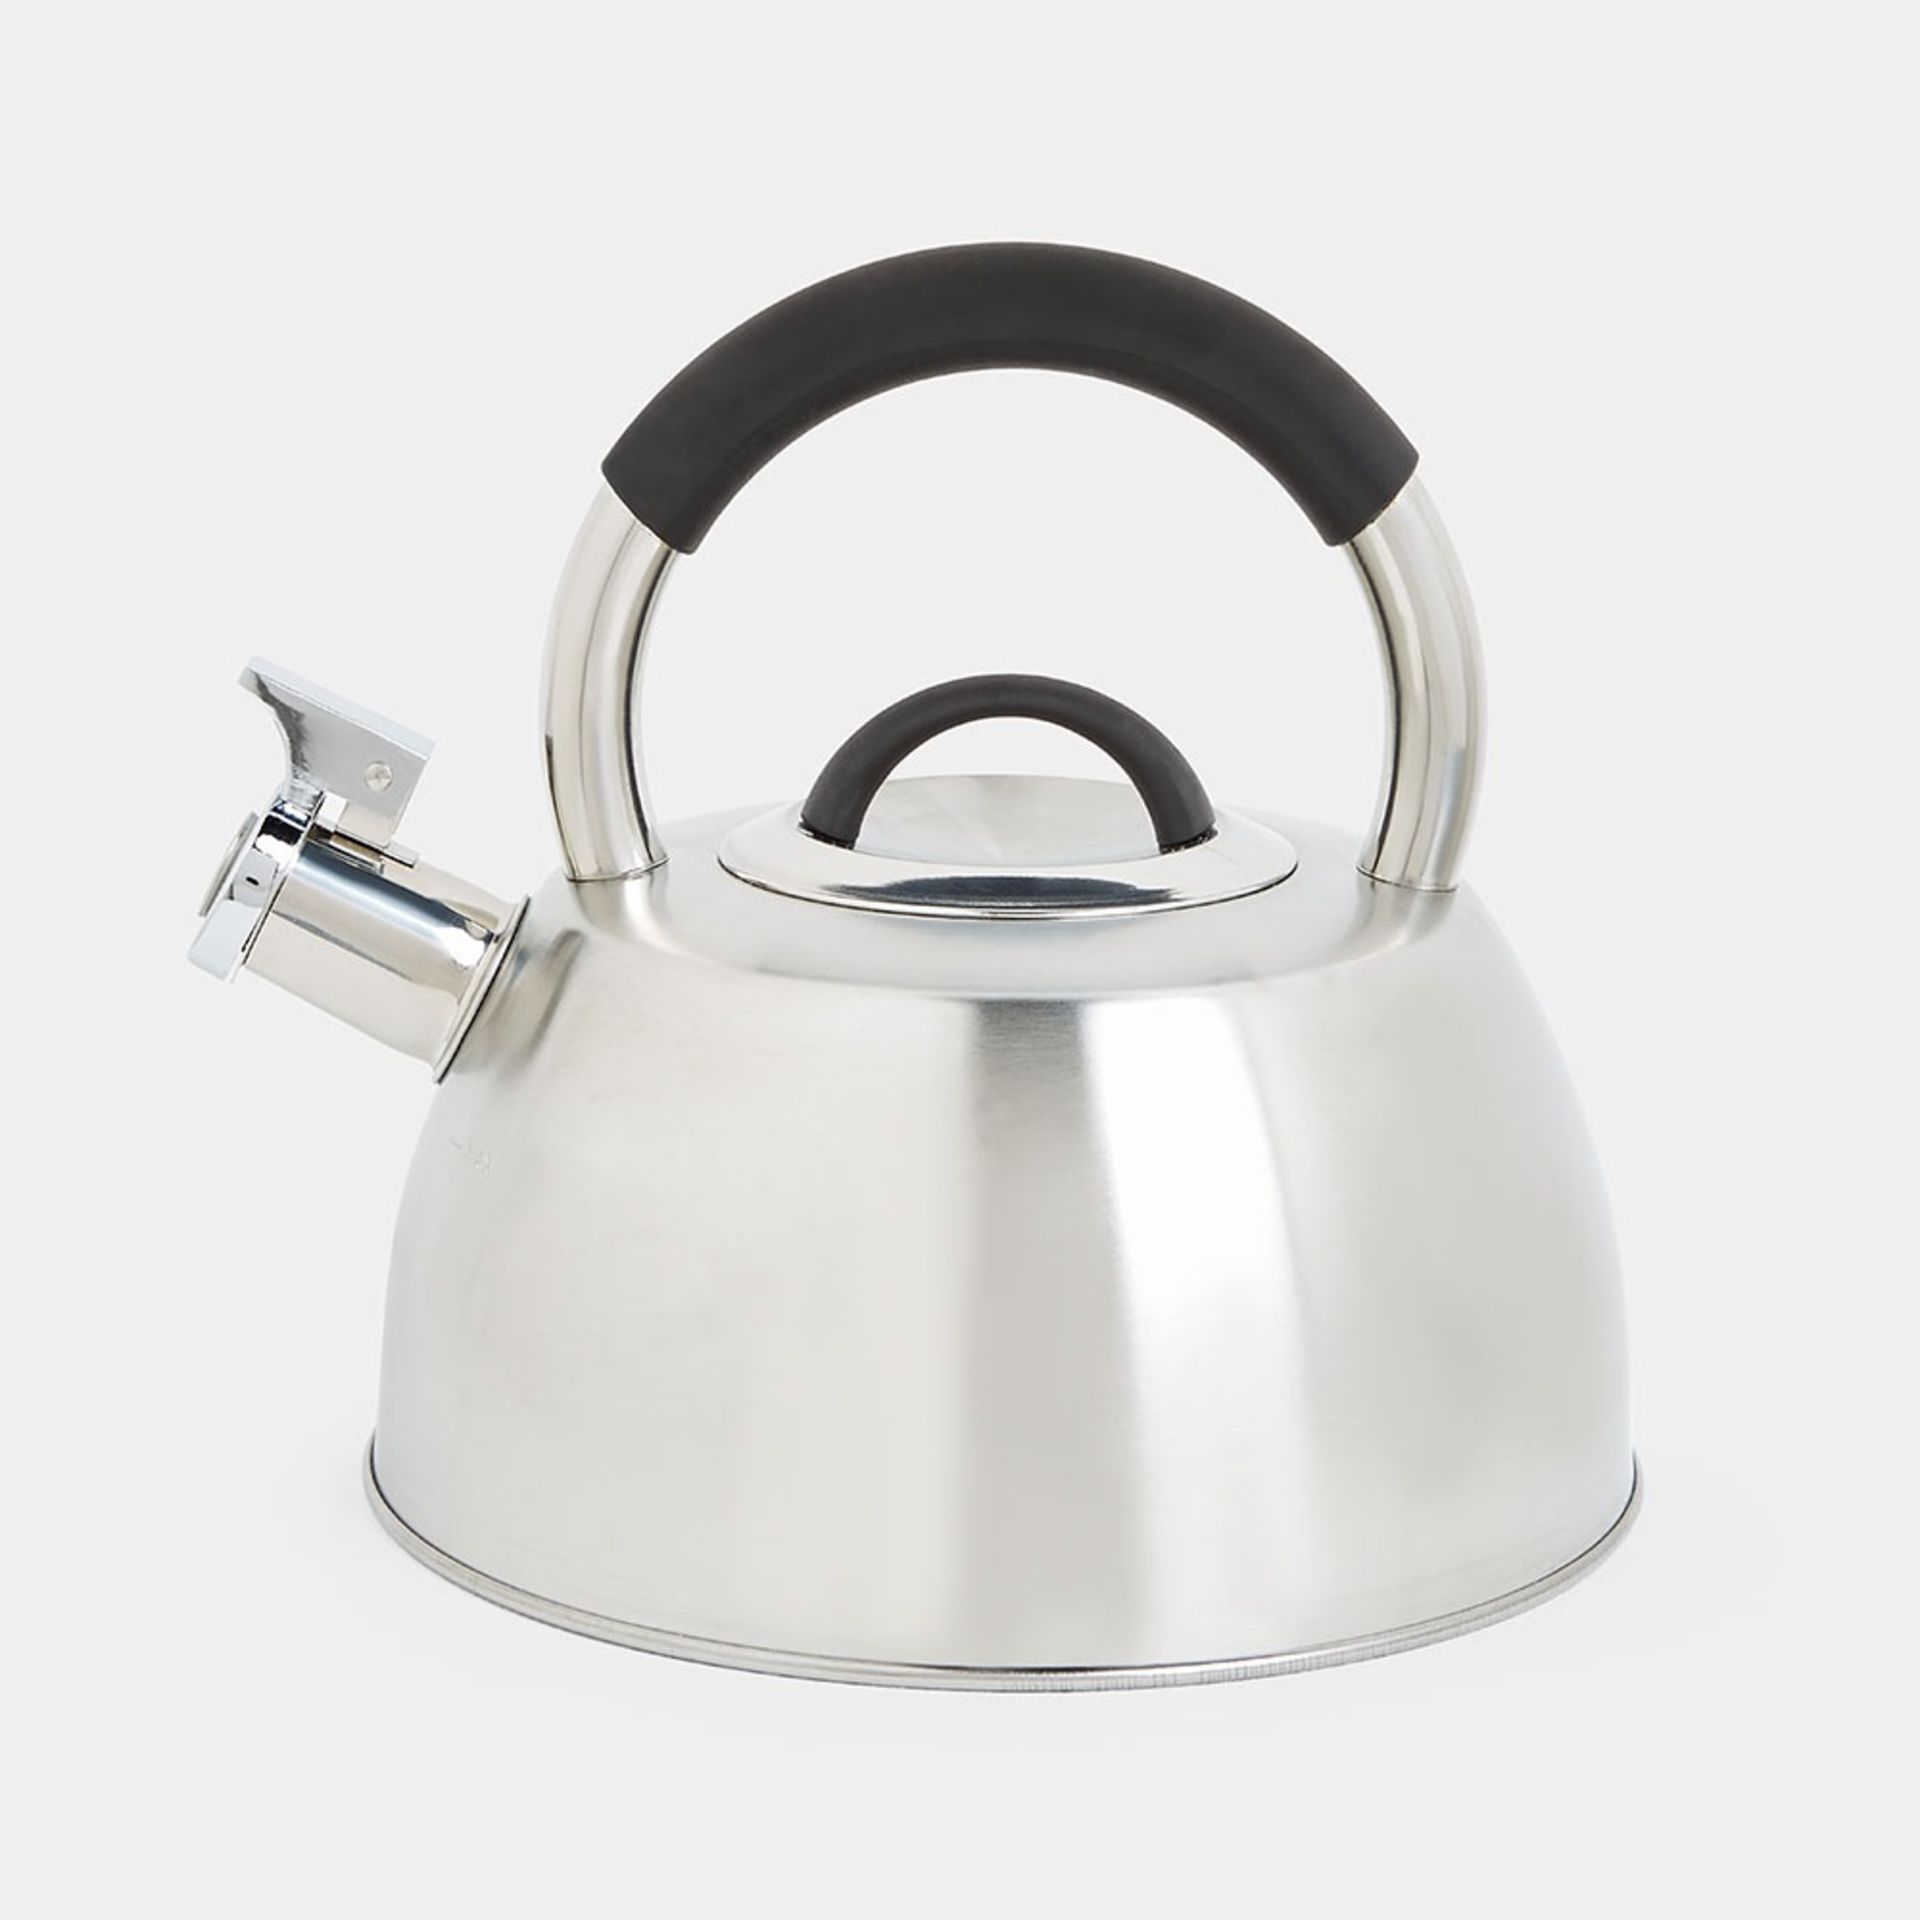 Silver Stainless Steel Whistling Stove Top Kettle - 2.5L - ER33